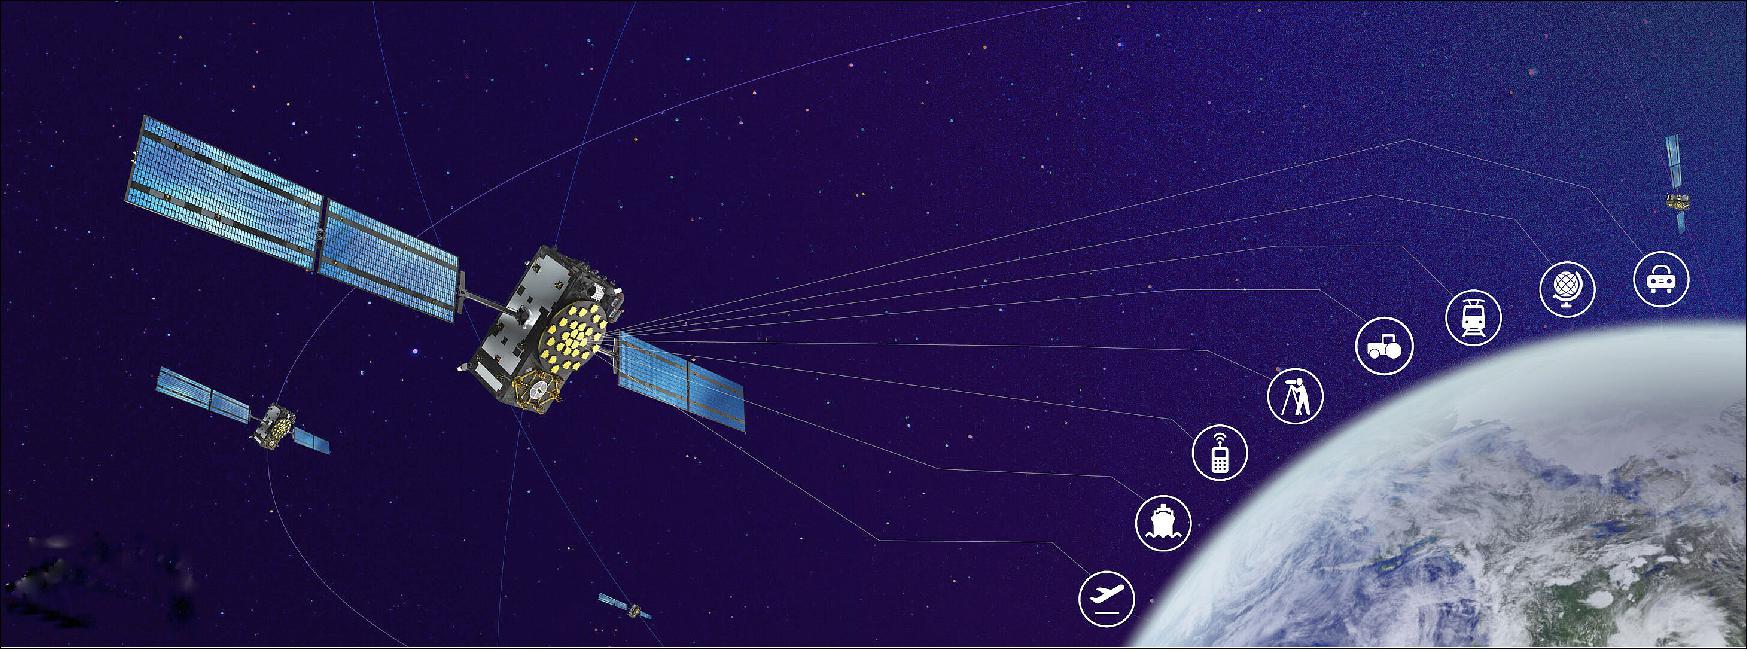 Figure 2: Galileo is Europe's own satellite navigation system, delivering metre-scale accuracy for users and applications across the globe (image credit: EUSPA)